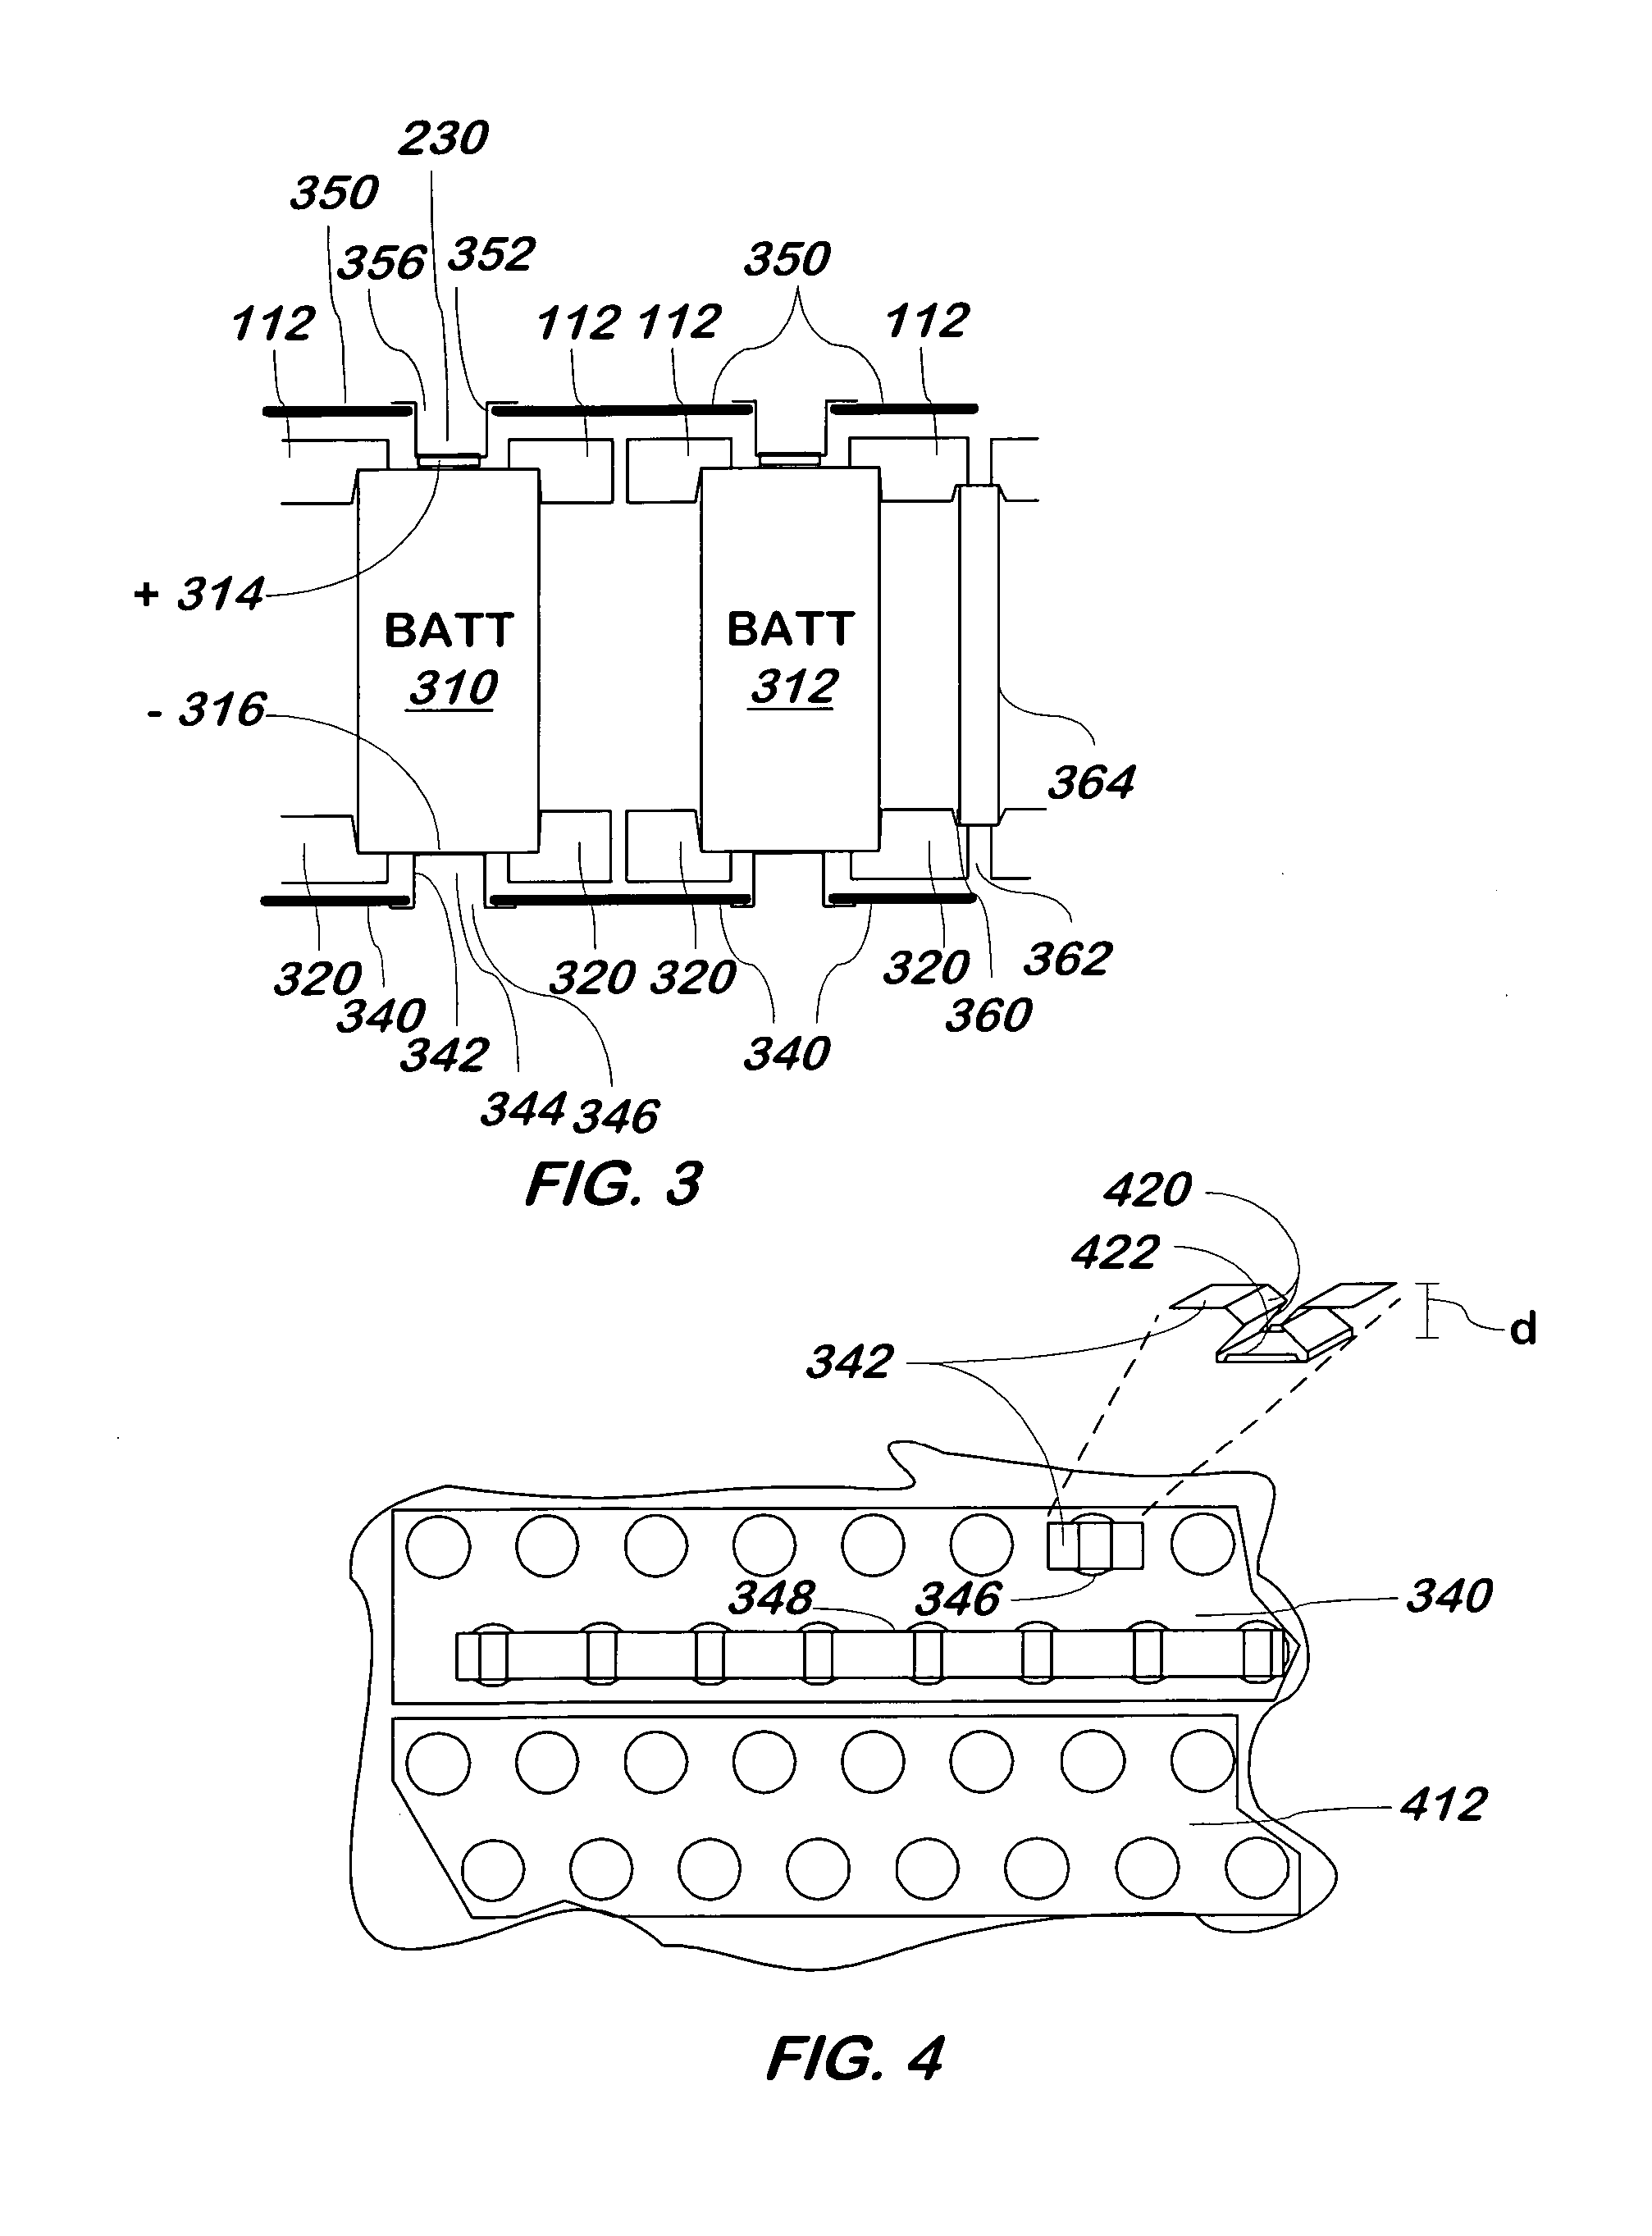 Method and apparatus for mounting, cooling, connecting and protecting batteries